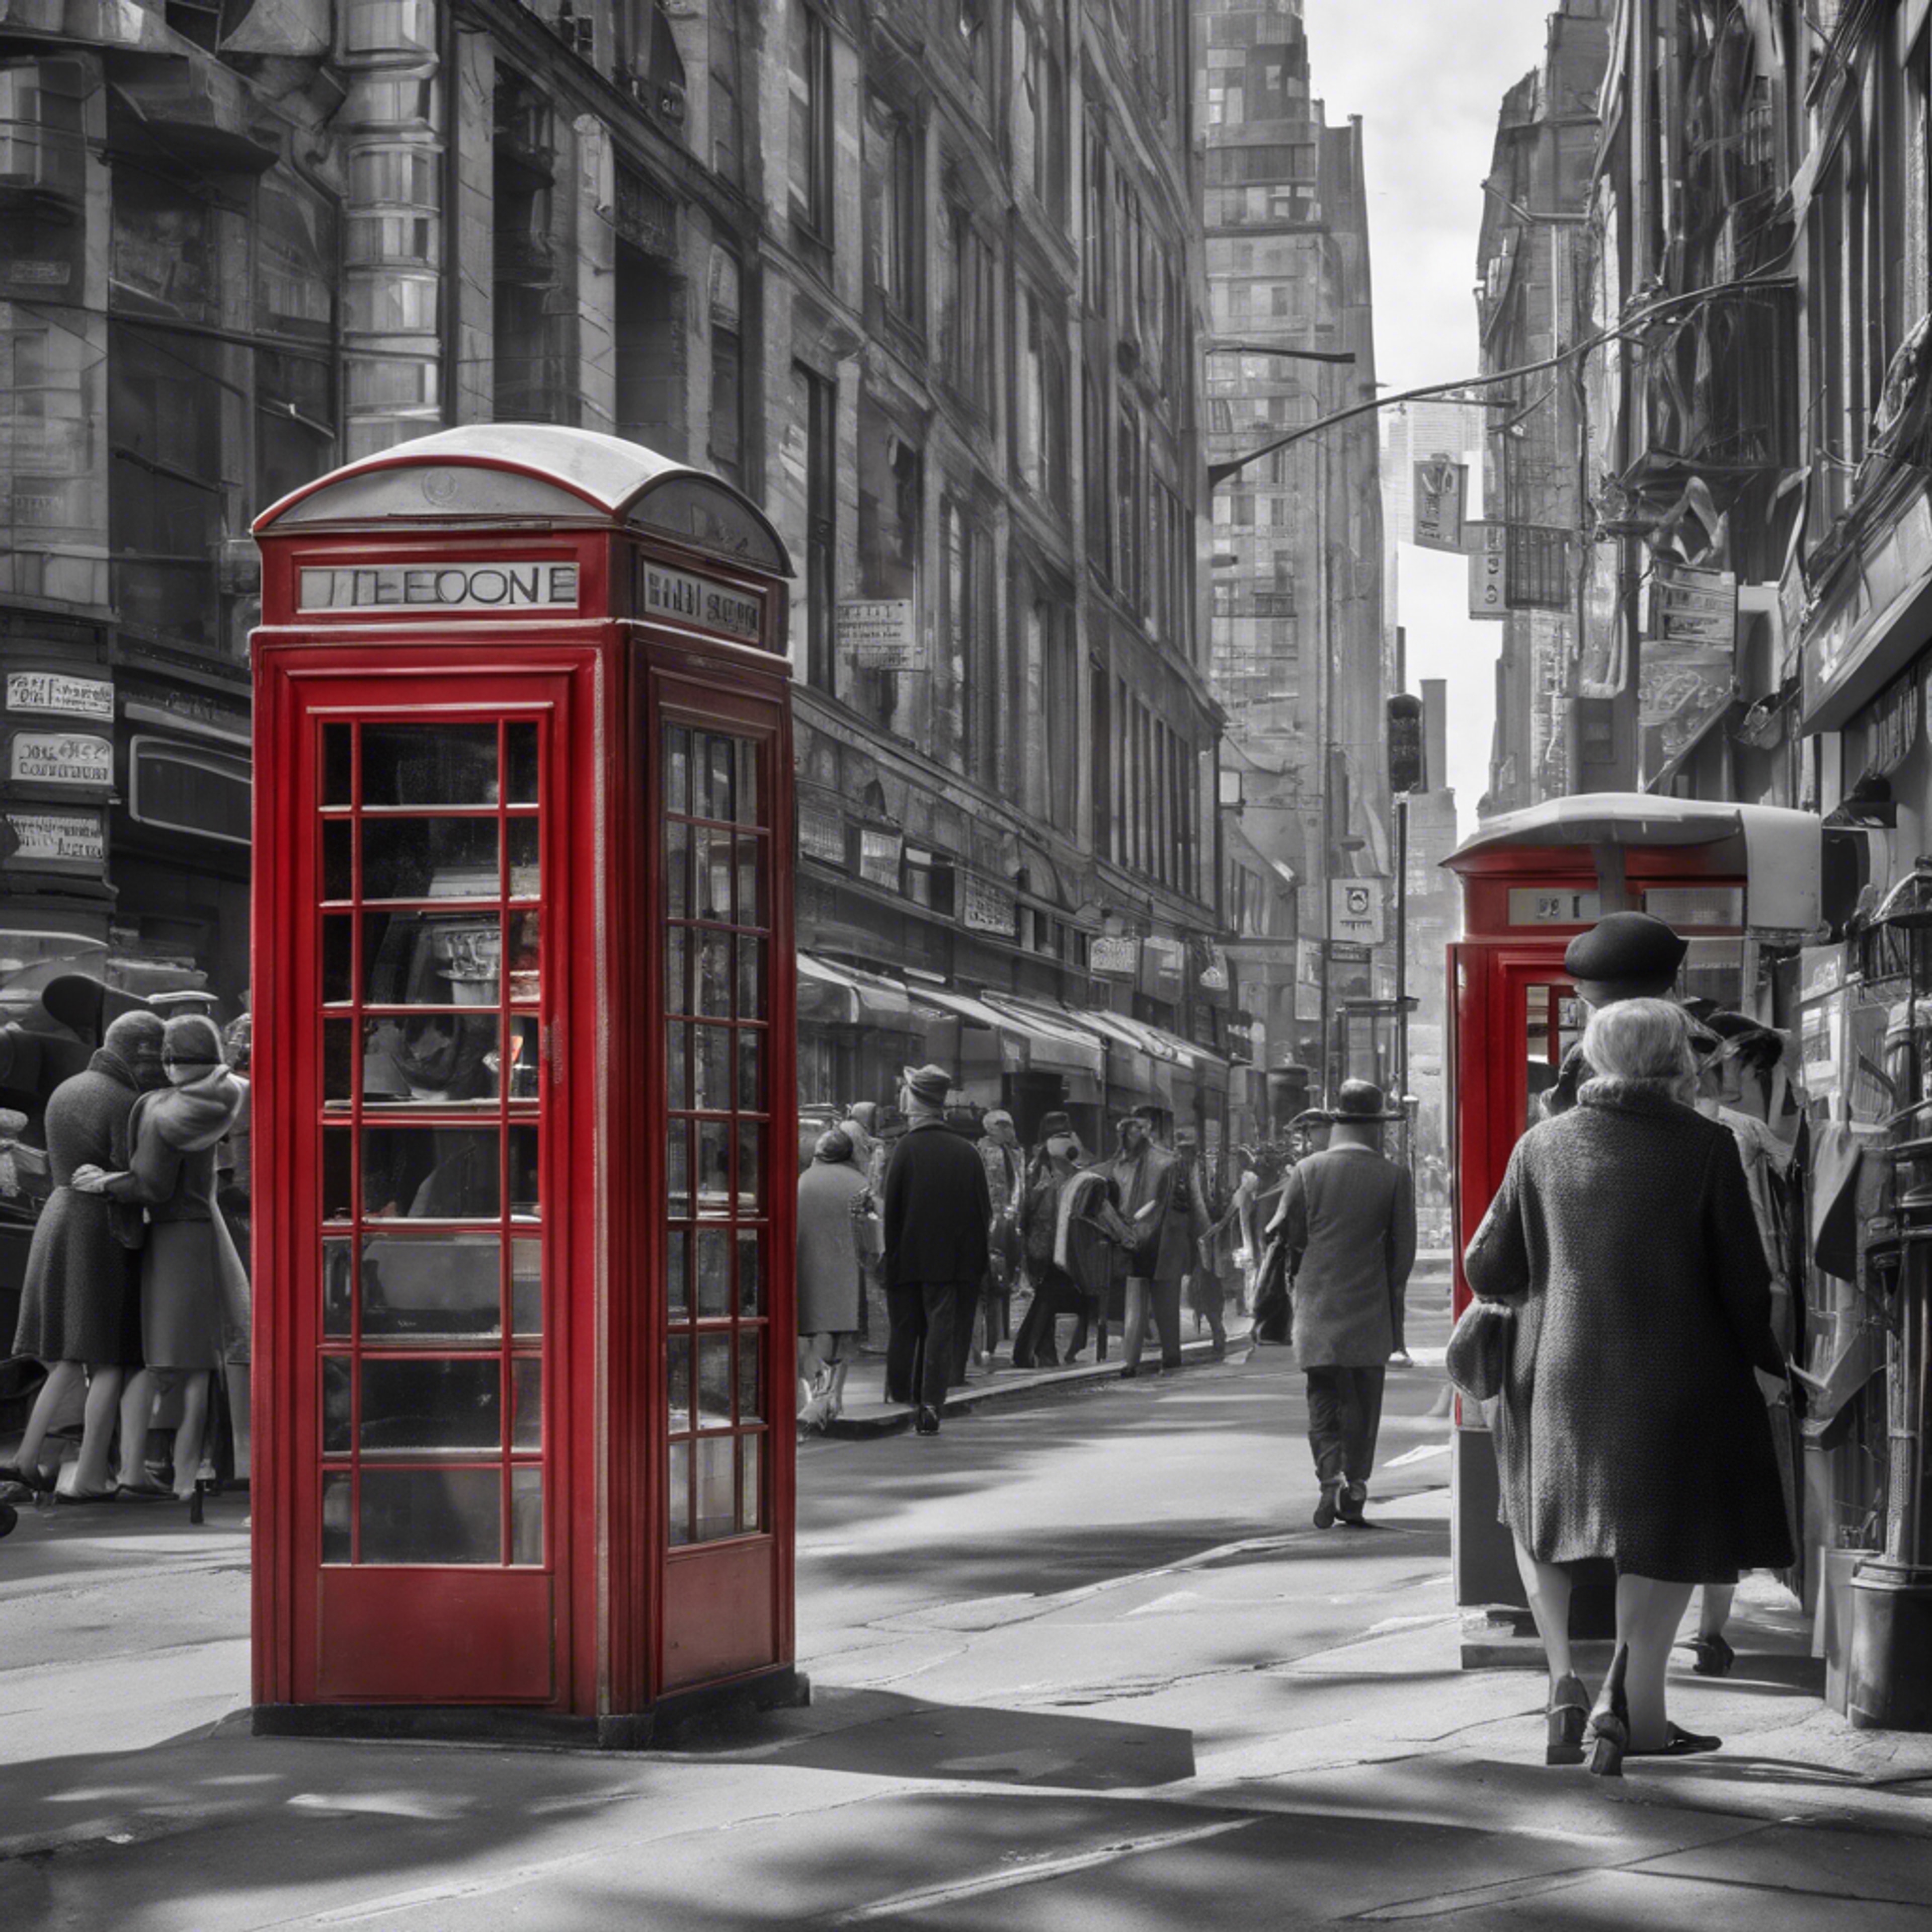 A black and white picture of a busy city street in the 1960s, with one characteristic iconic red phone booth. Tapeta[8cad1b57085c4579b492]